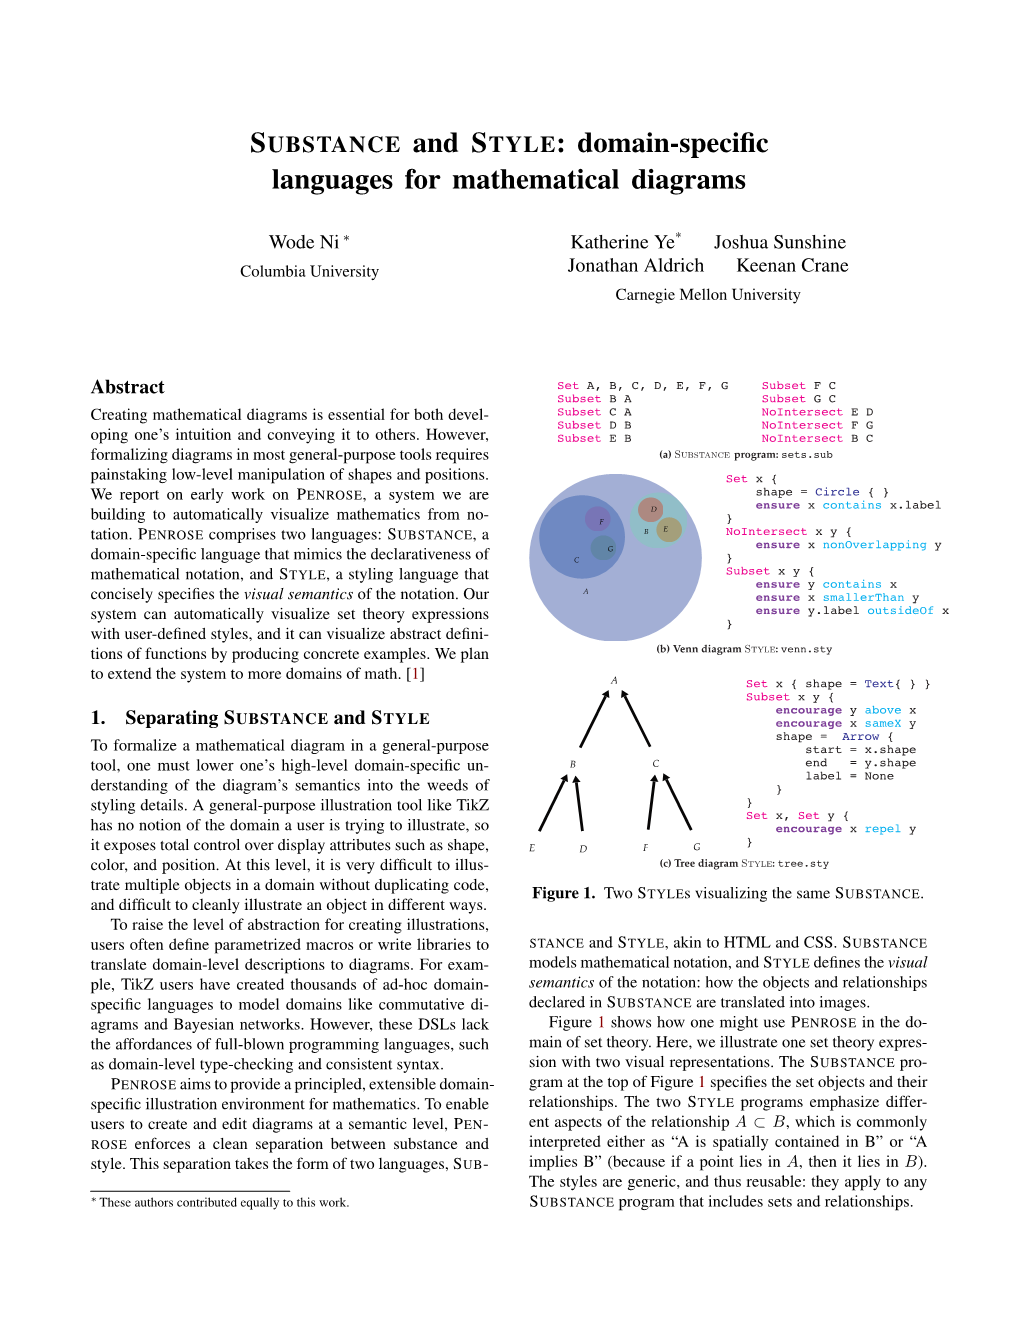 Domain-Specific Languages for Mathematical Diagrams